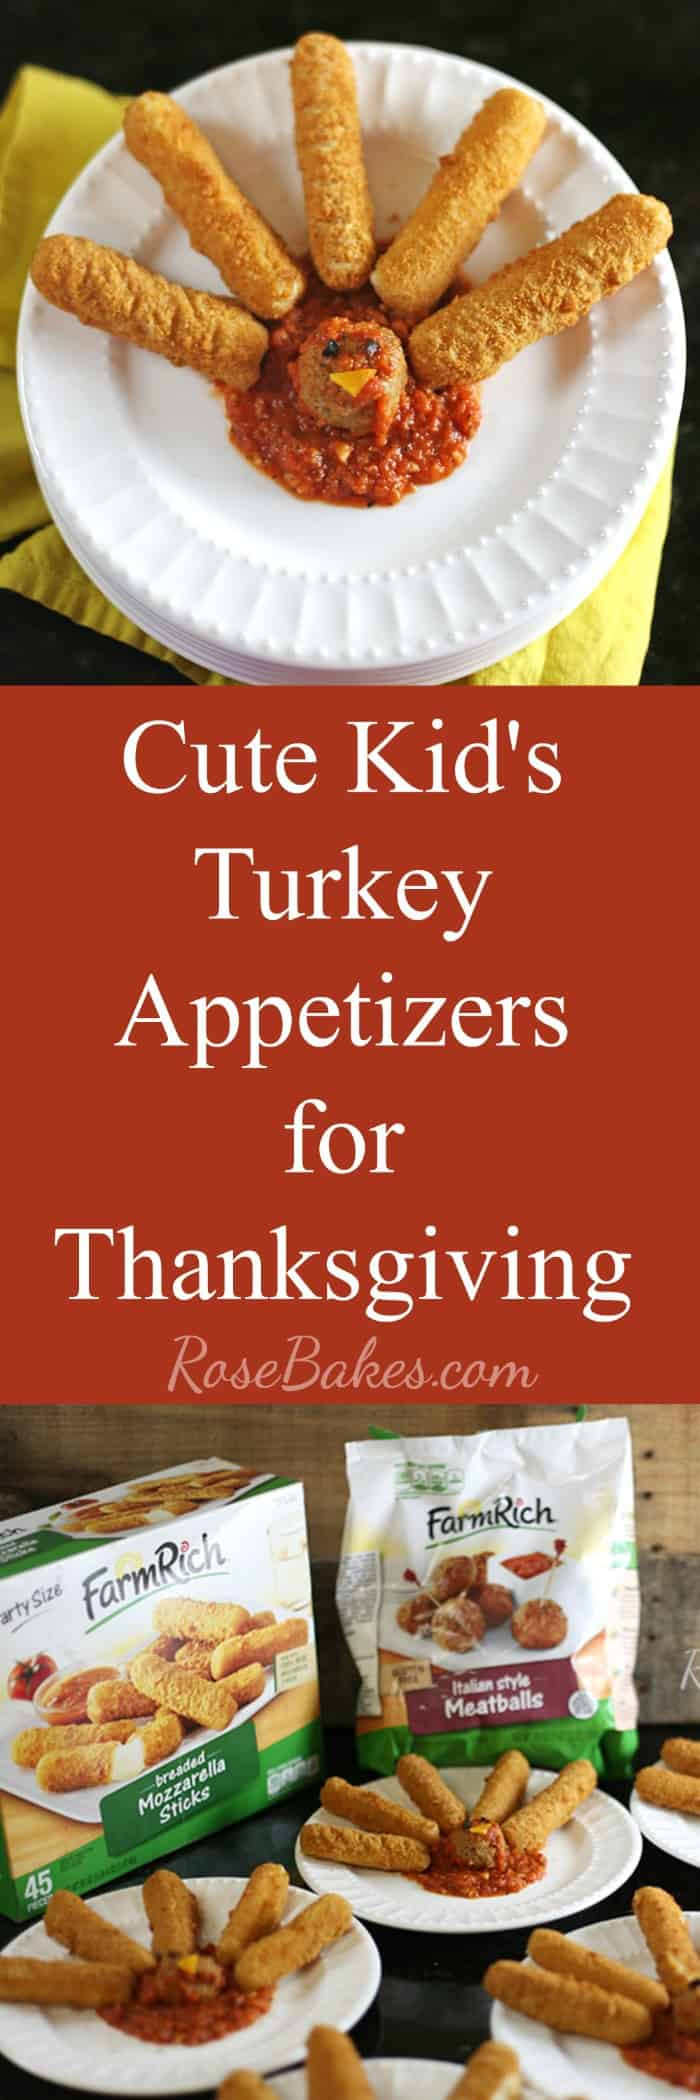 Thanksgiving Appetizers For Kids
 Easy Kids Thanksgiving Appetizers with Homemade Marinara